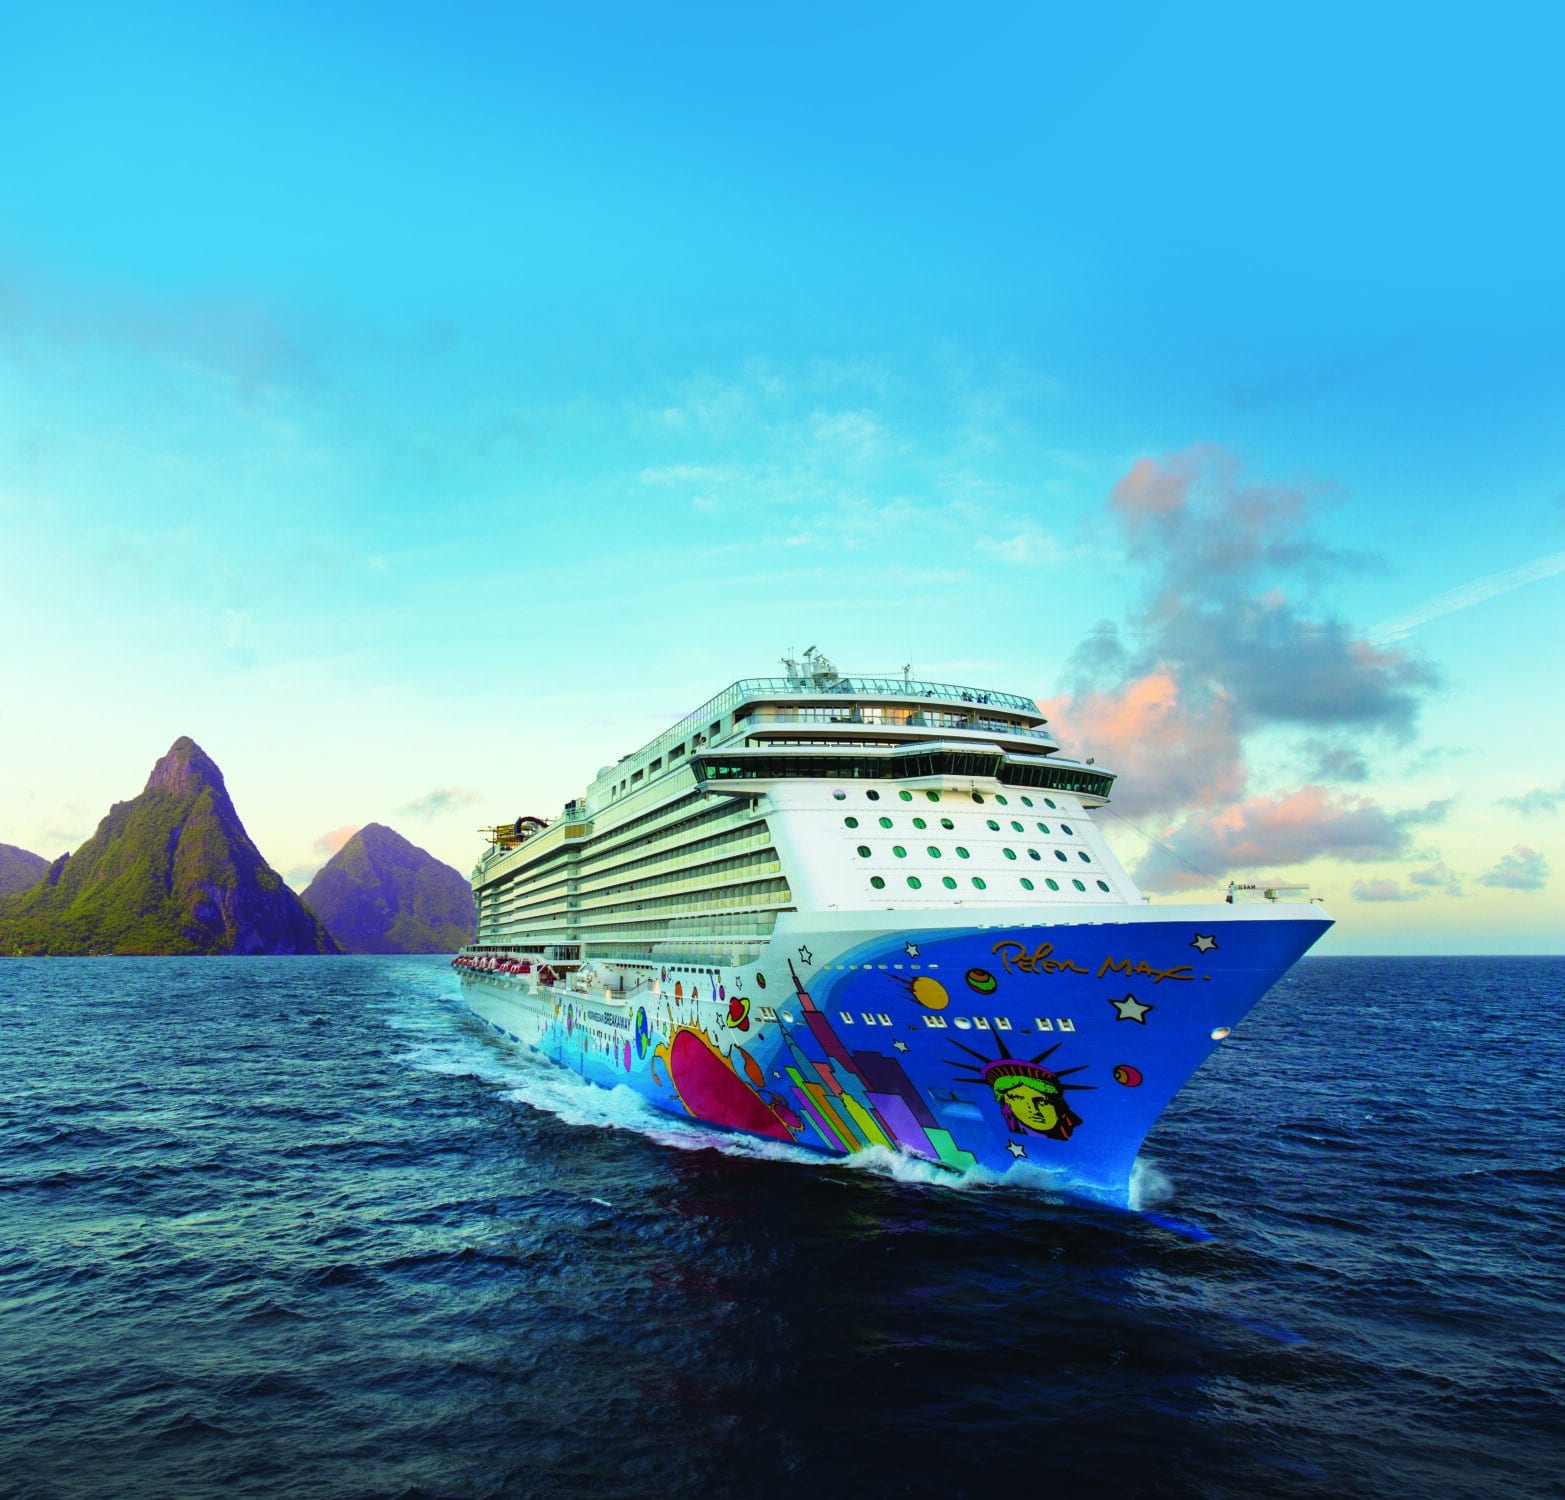 ncl cruise next offers